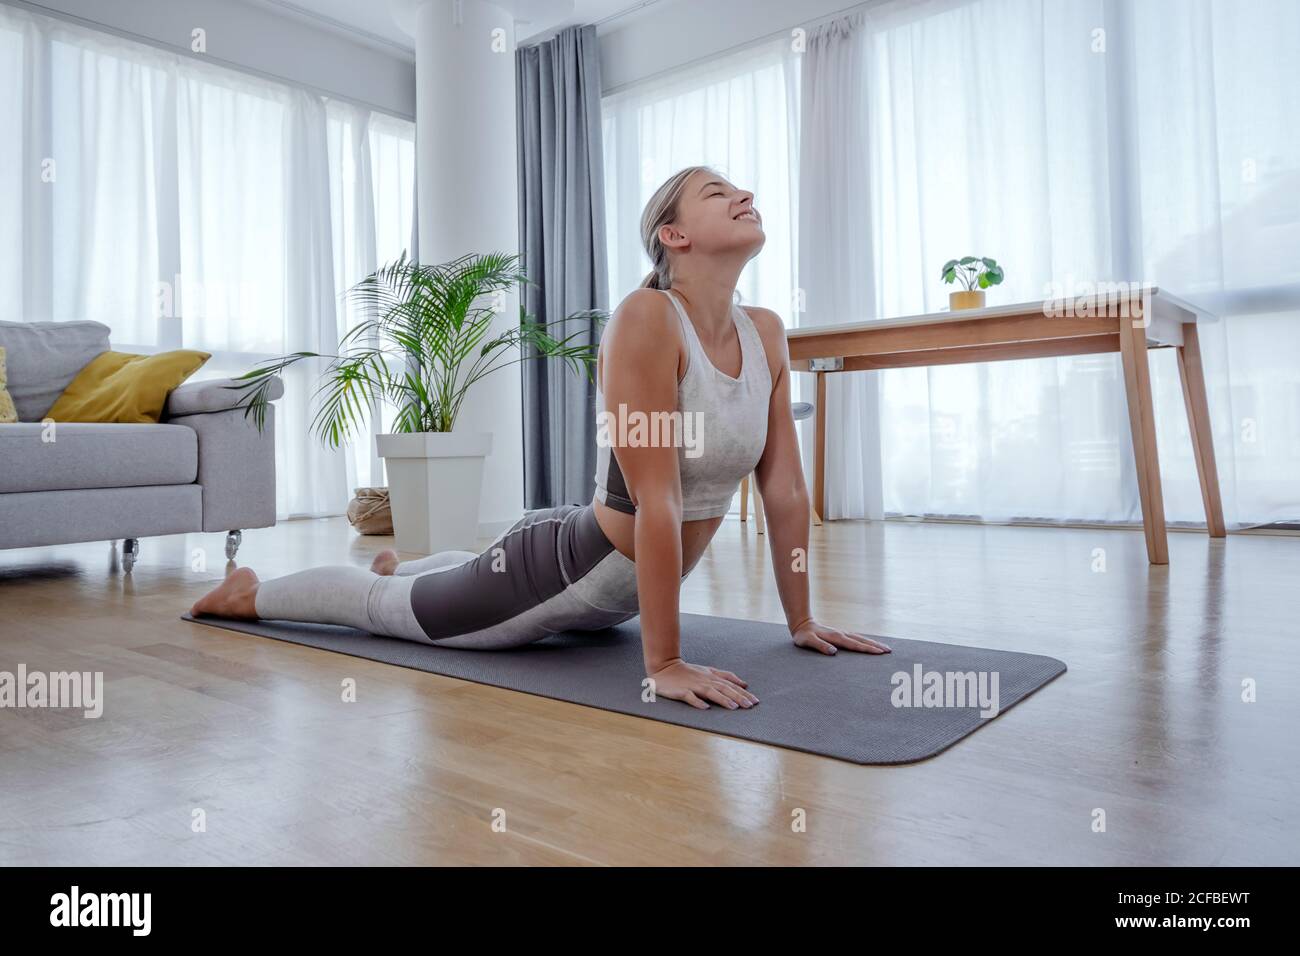 Beautiful active young woman practices yoga asana upward facing dog pose at home. Healthy lifestyle and sports concept. Series of exercise poses. Stock Photo